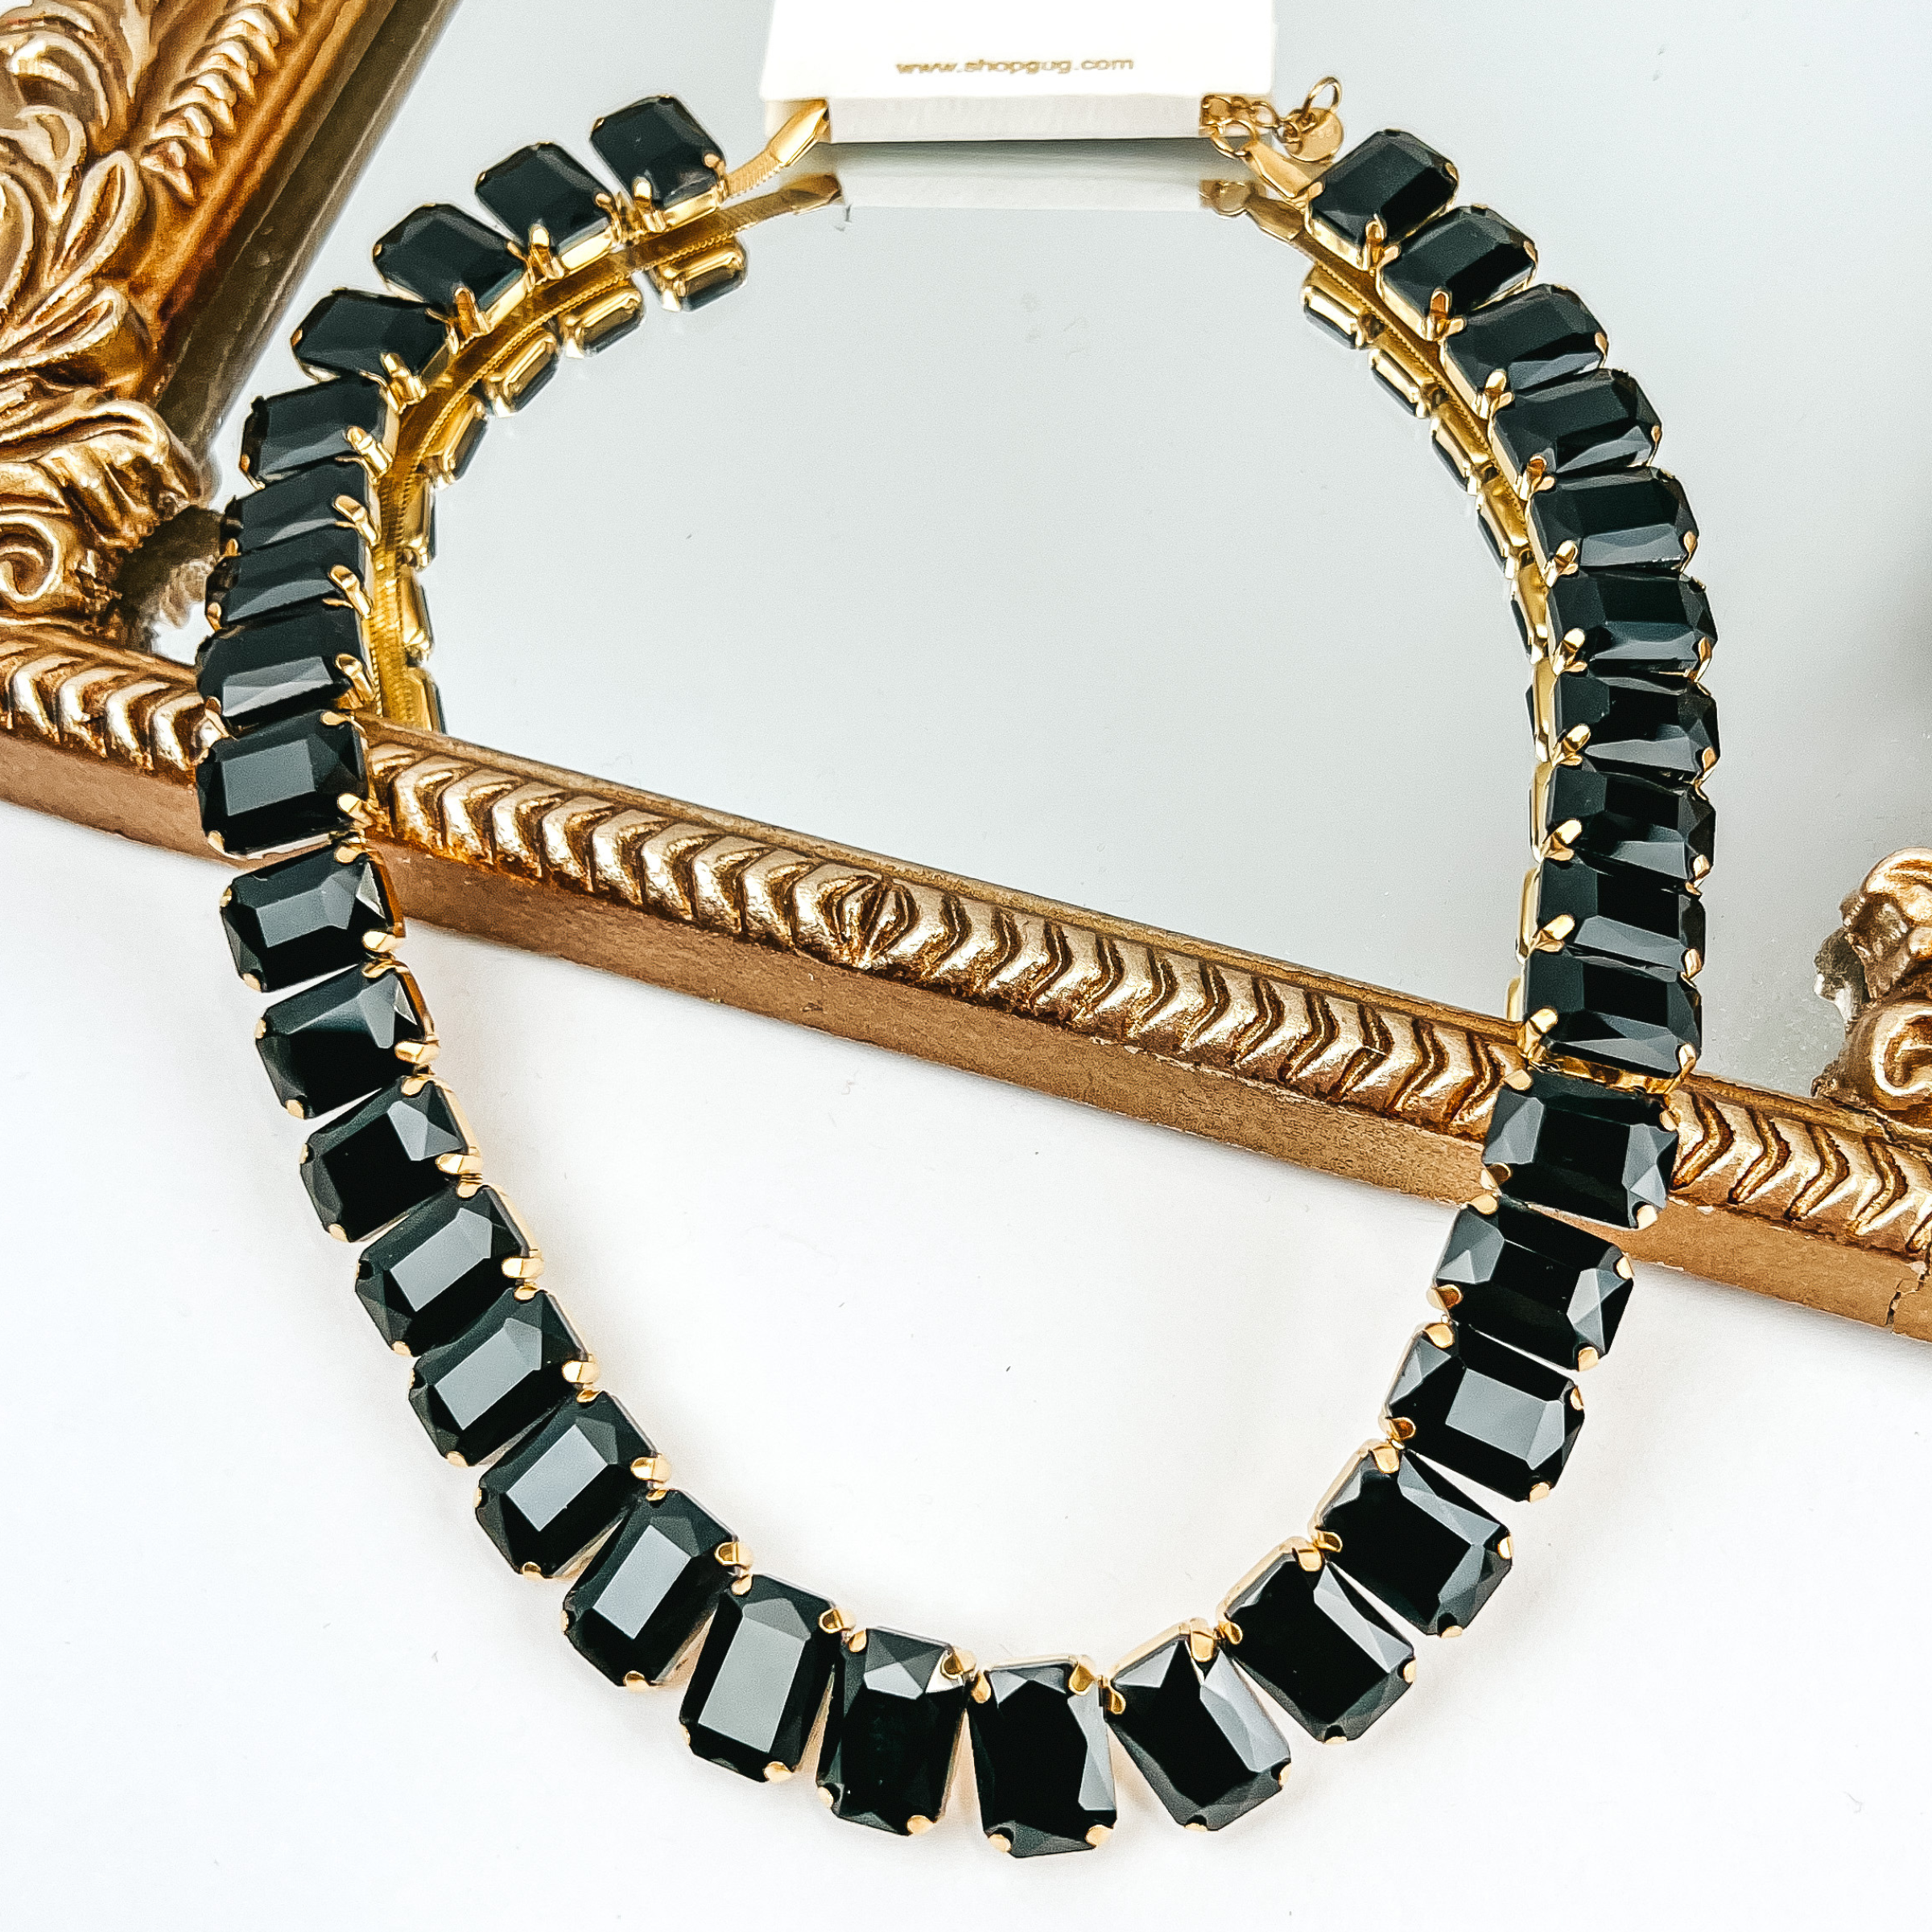 Black, rectangle crystal necklace. This necklace is pictured partially laying on a gold mirror on a white background. 